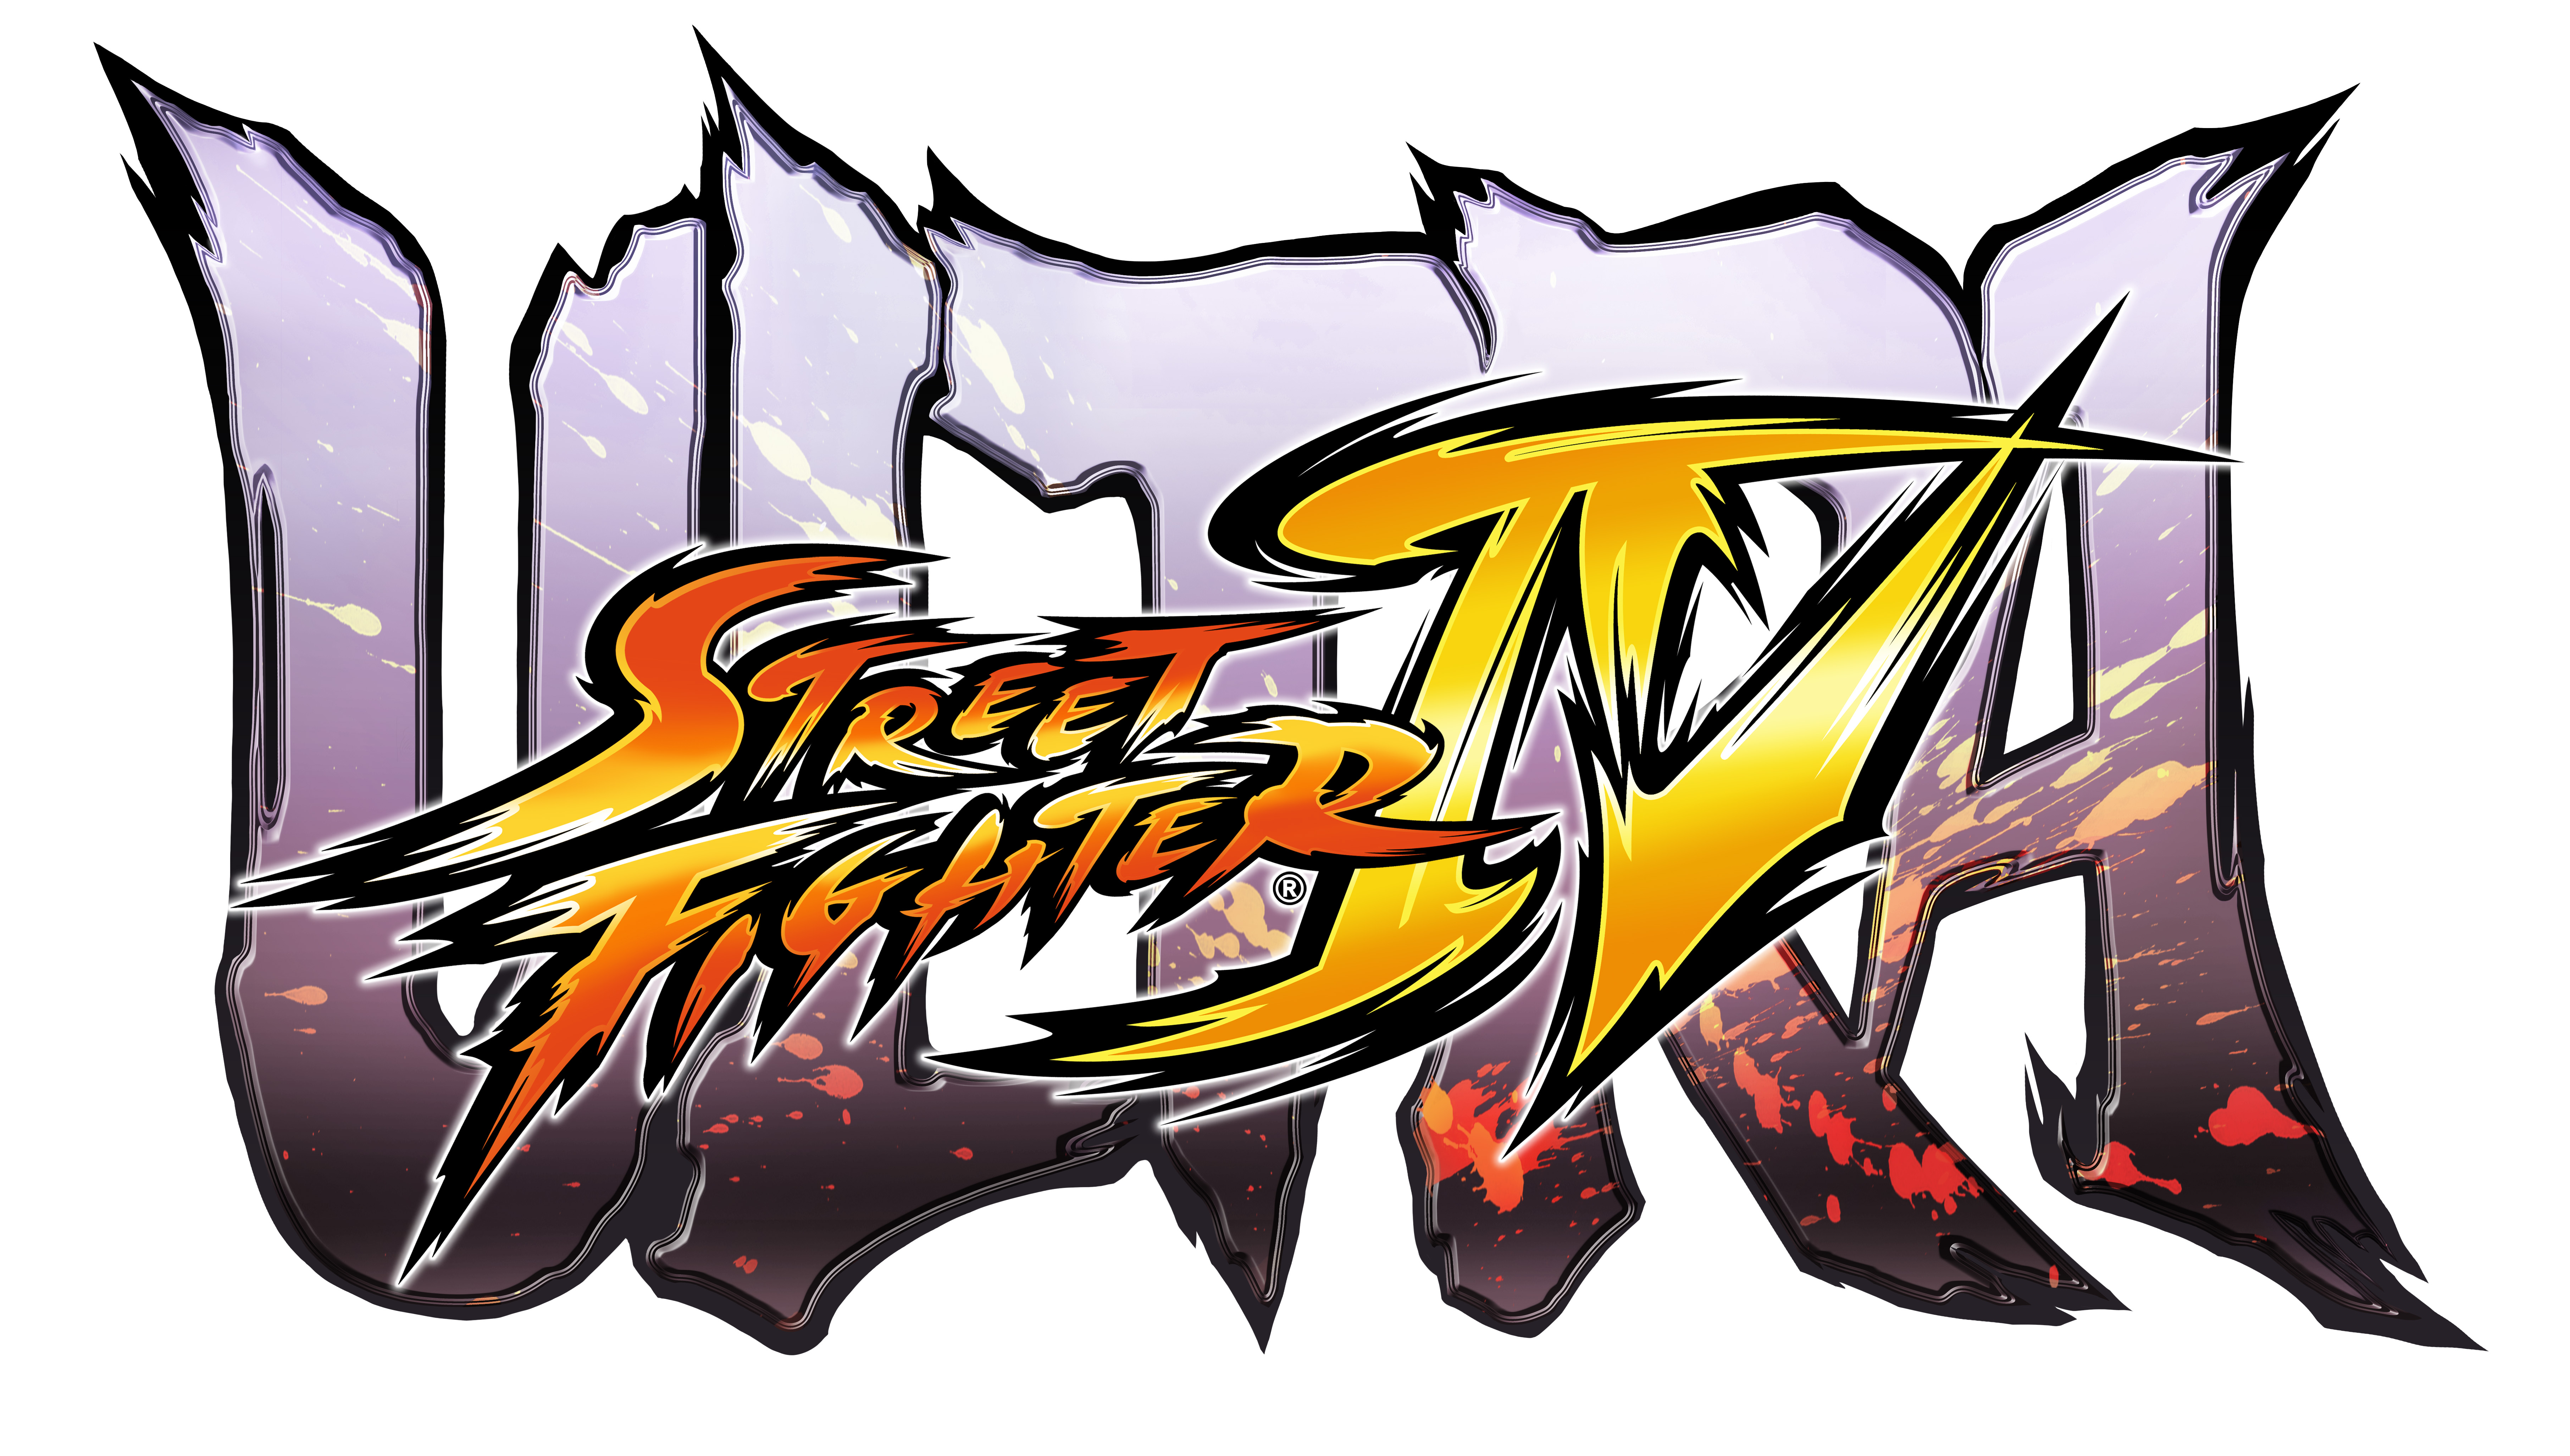 Ultra Street Fighter Iv Announced Trailer Screehnshots And Hi Res